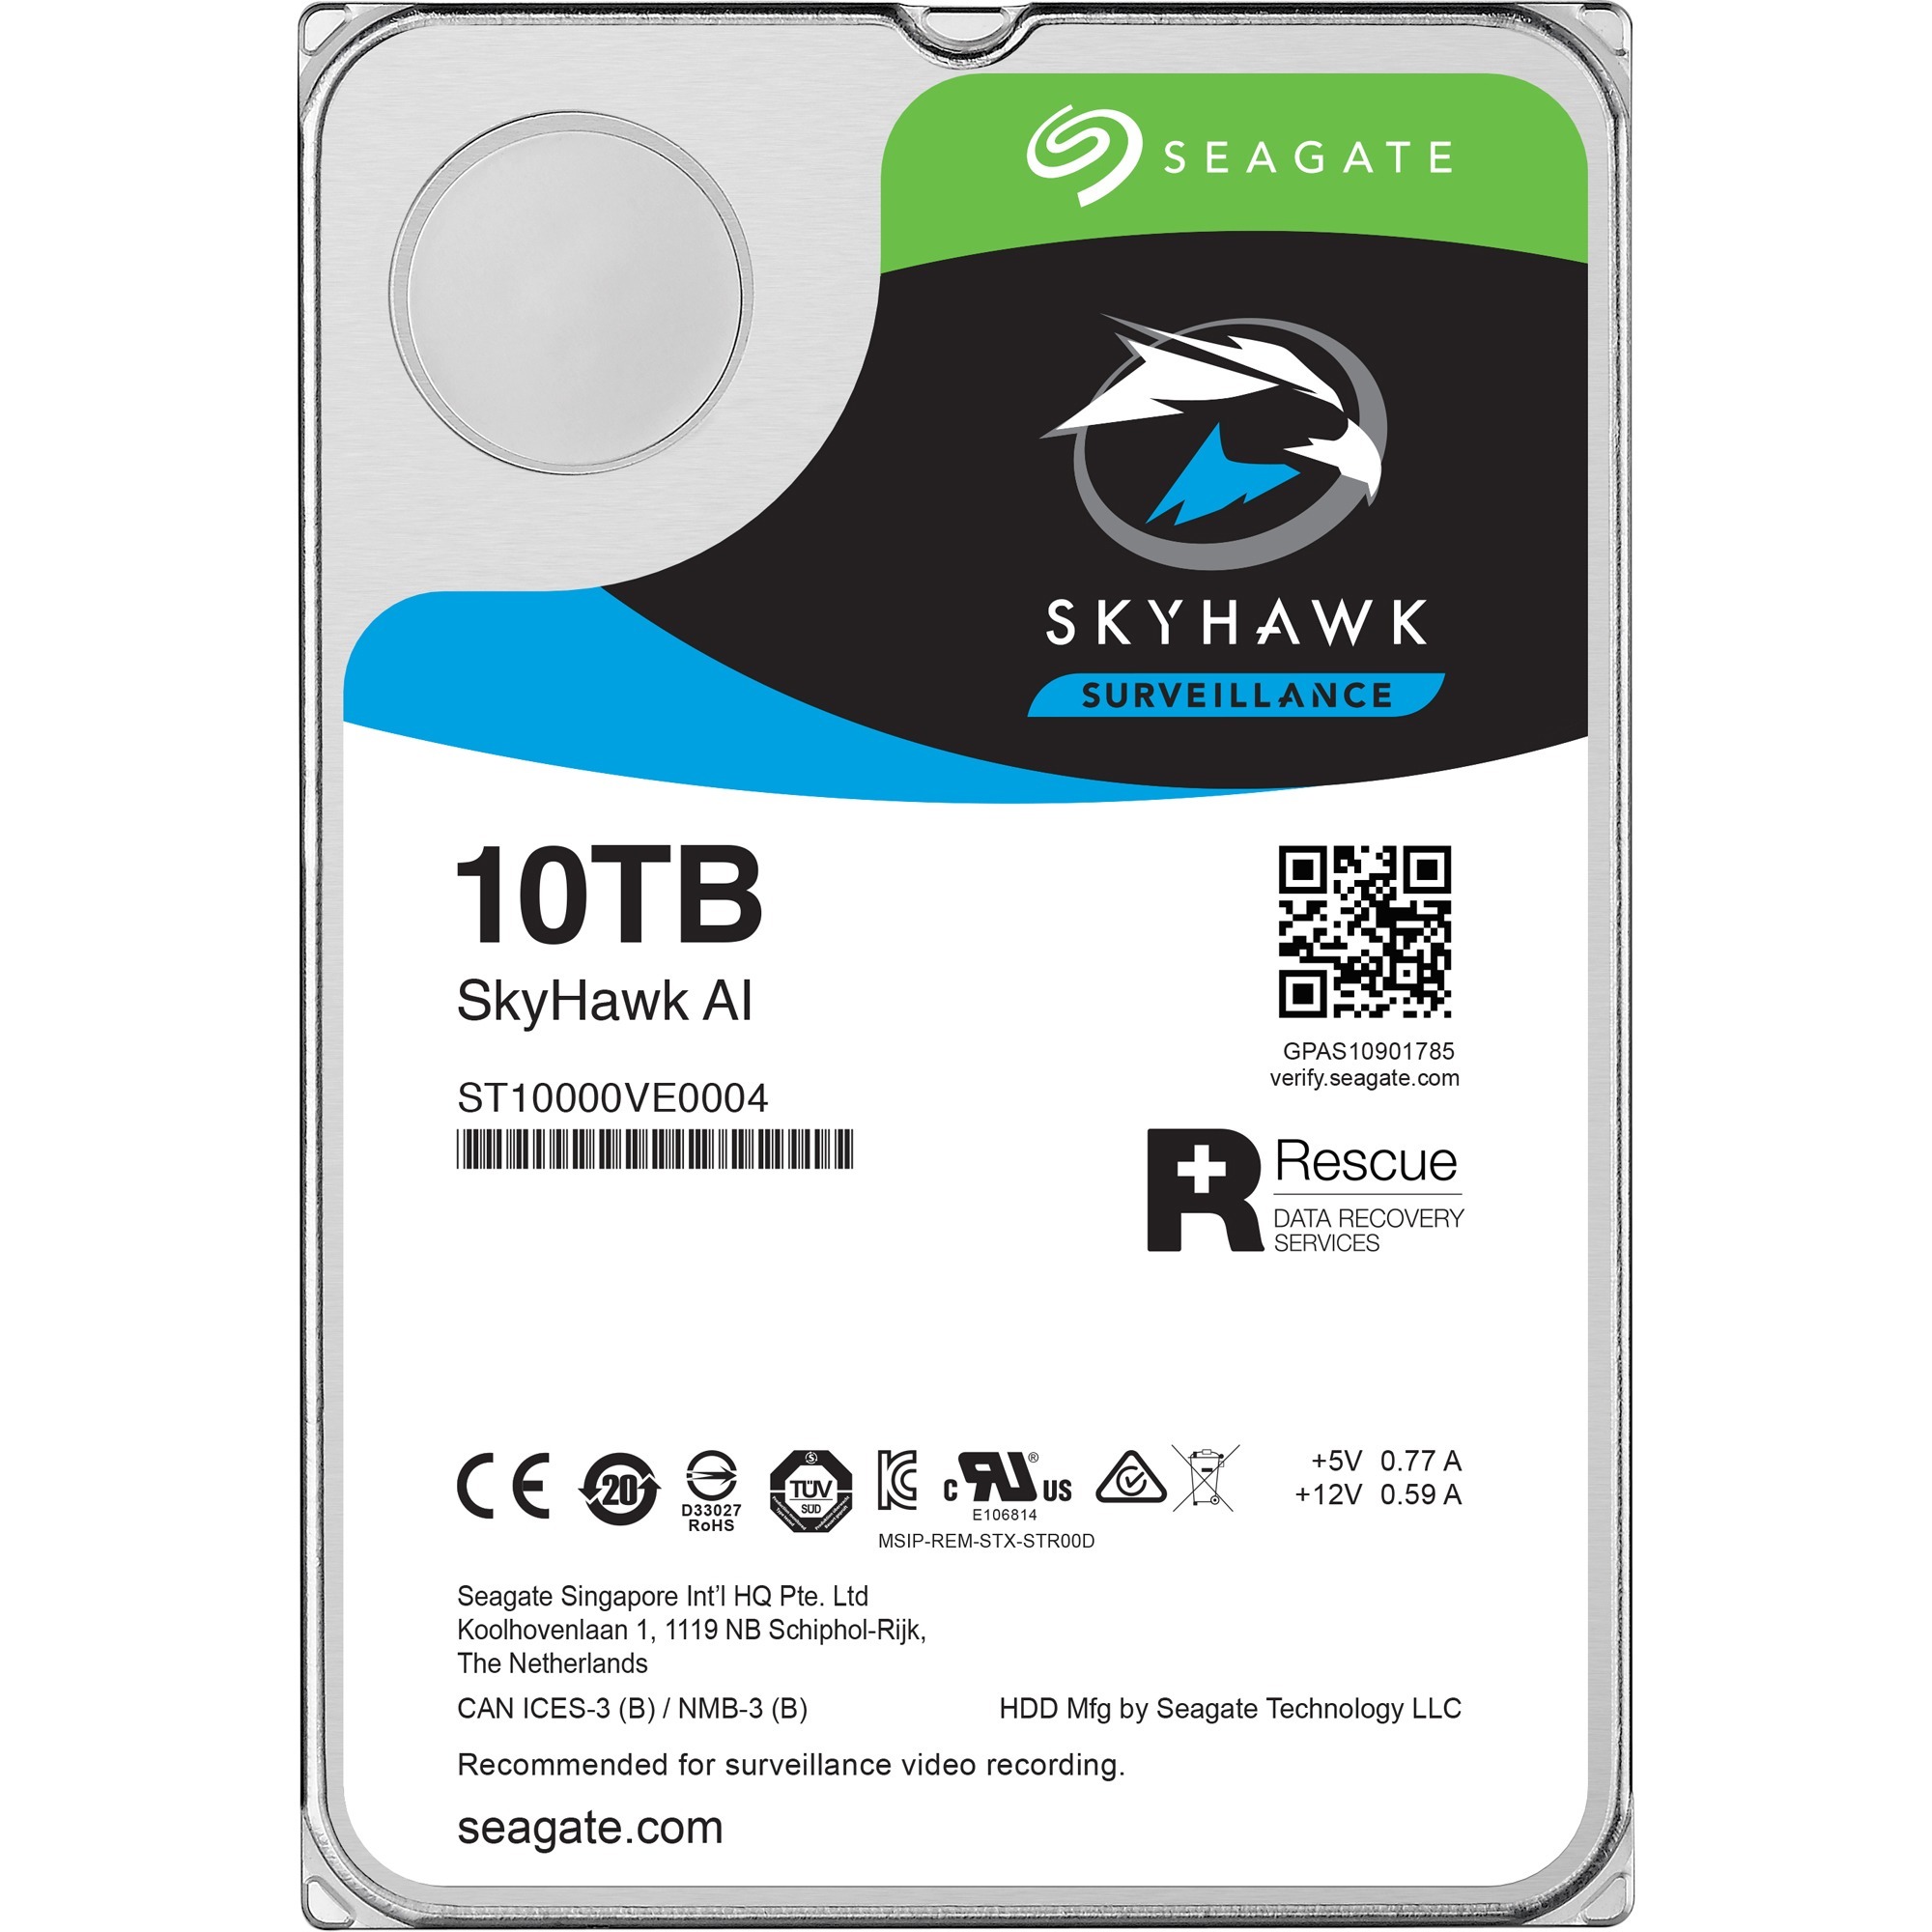 Seagate SkyHawk AI ST10000VE0004 - Hard drive - 10 TB - internal - 3.5" - SATA 6Gb/s - buffer: 256 MB - with Seagate Rescue Data Recovery - image 2 of 5